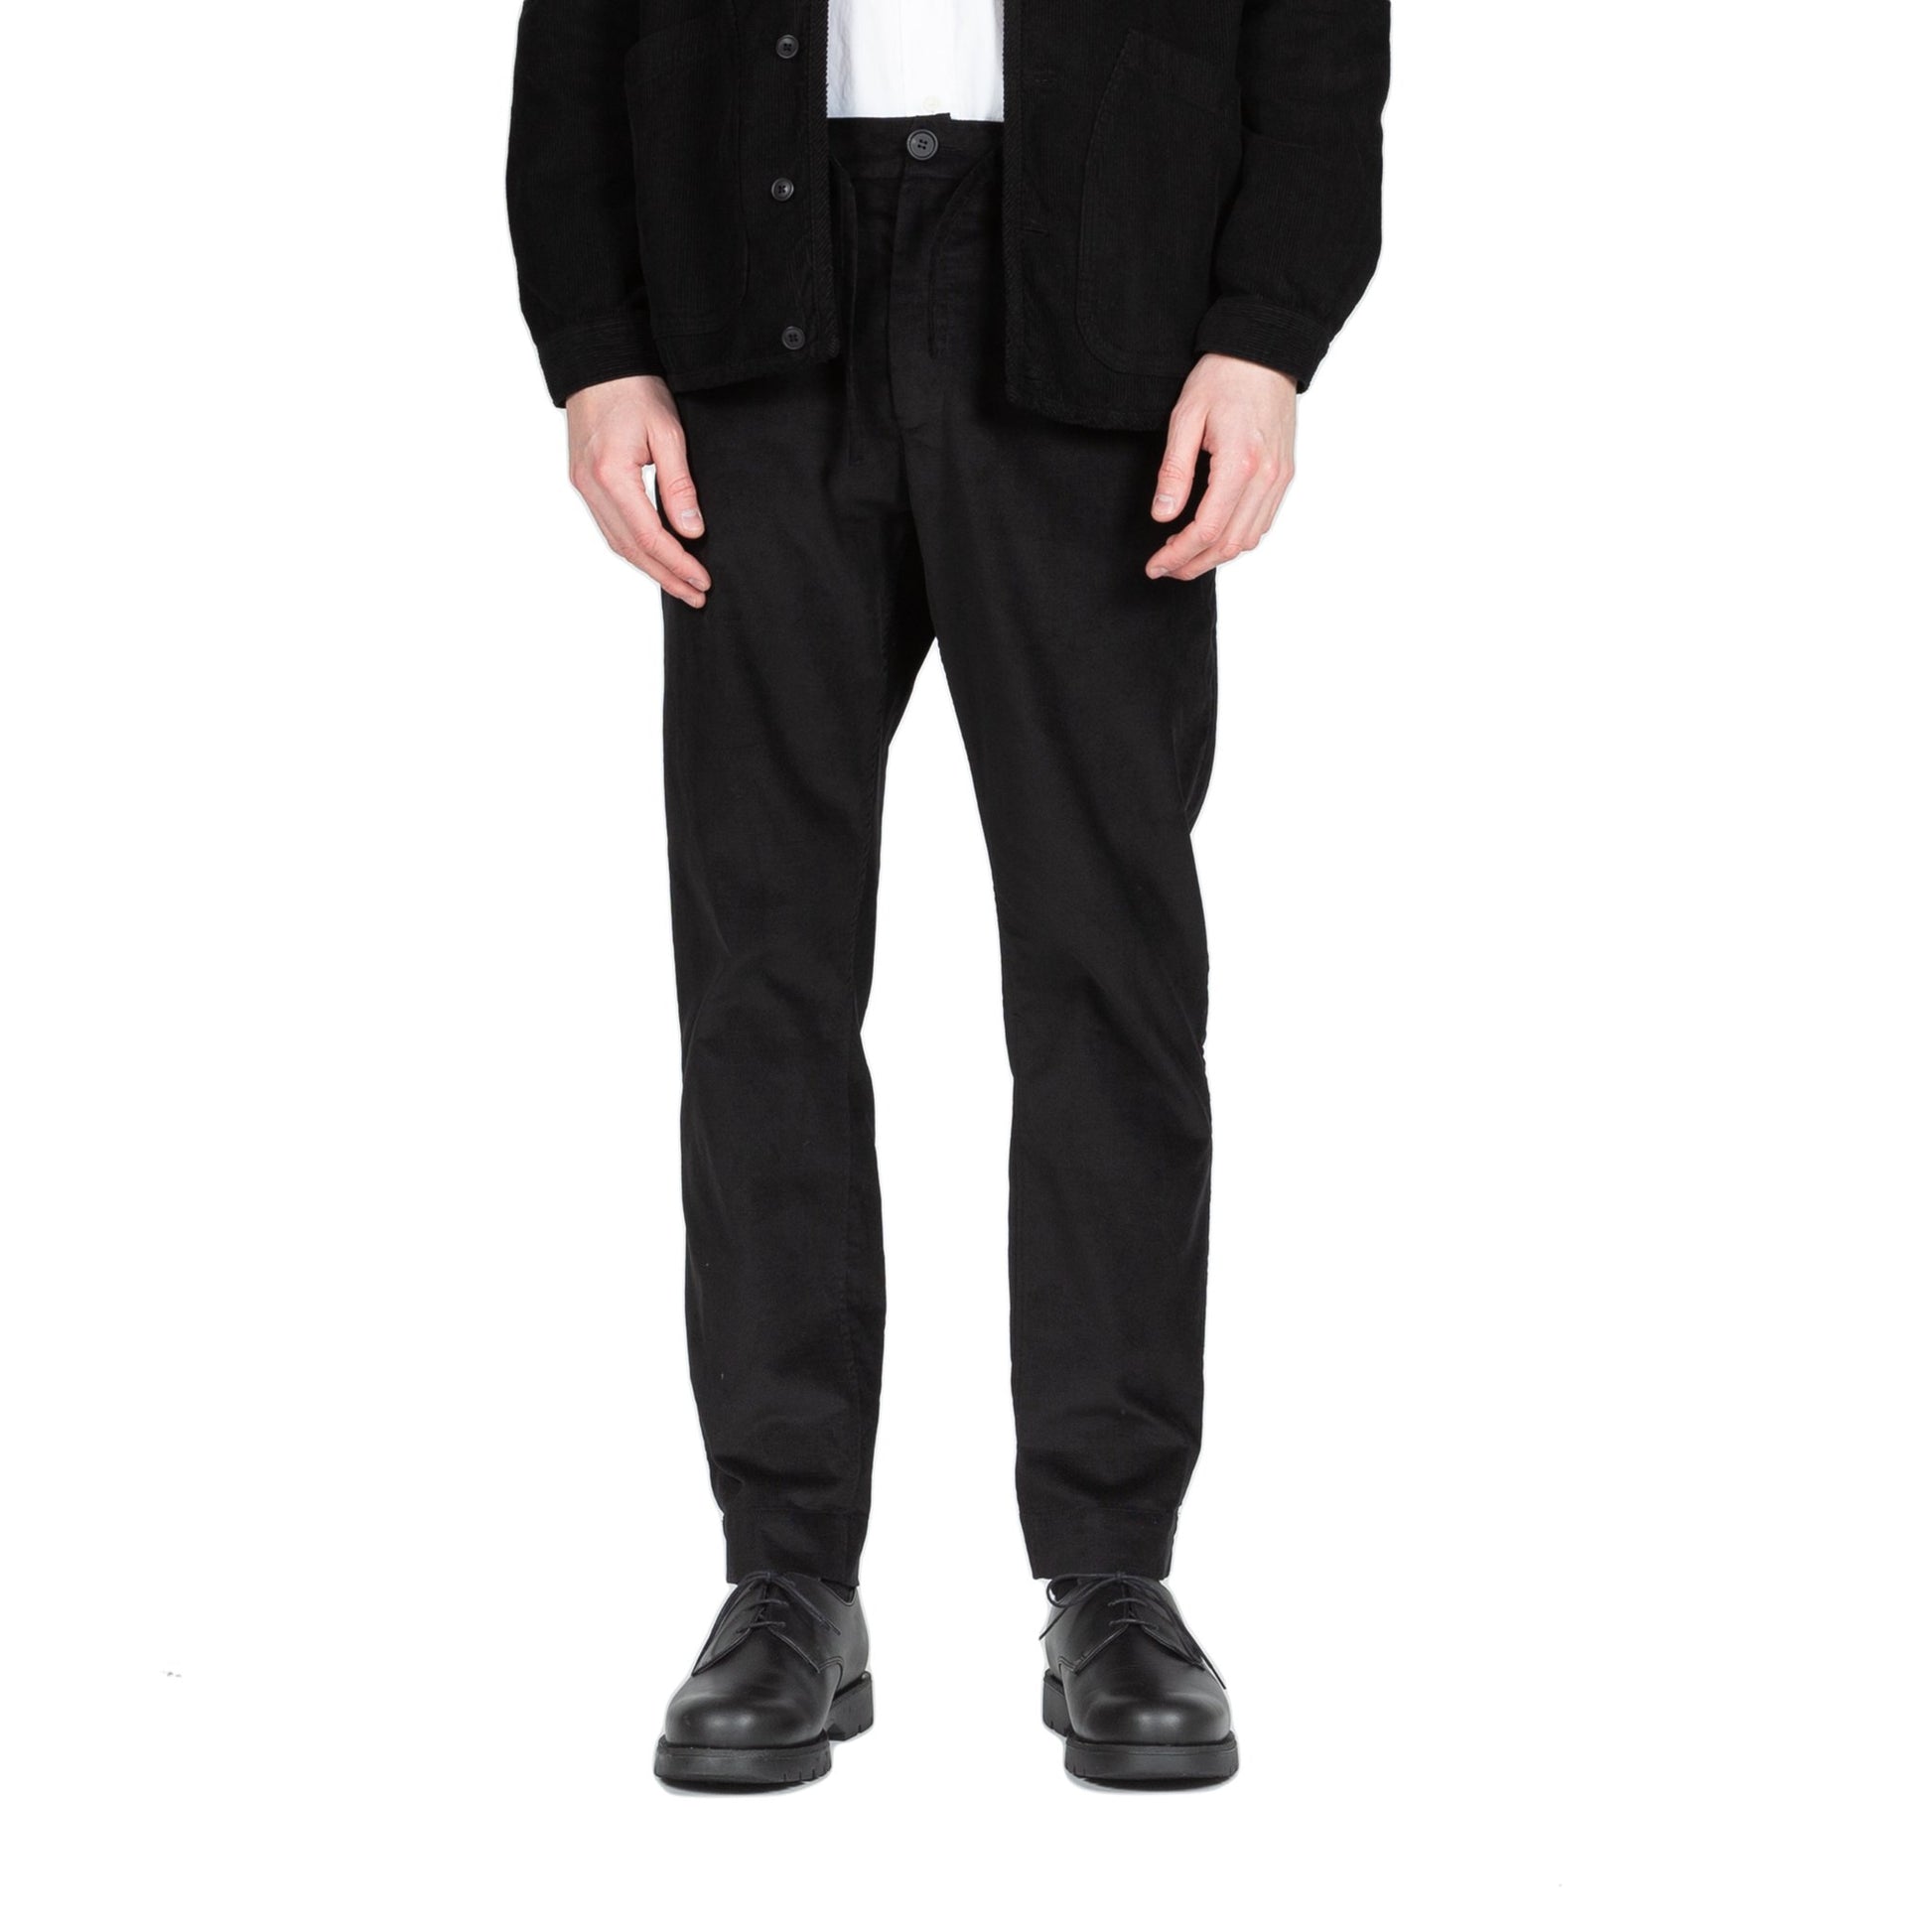 Kestin Hare Inverness Trousers in Black